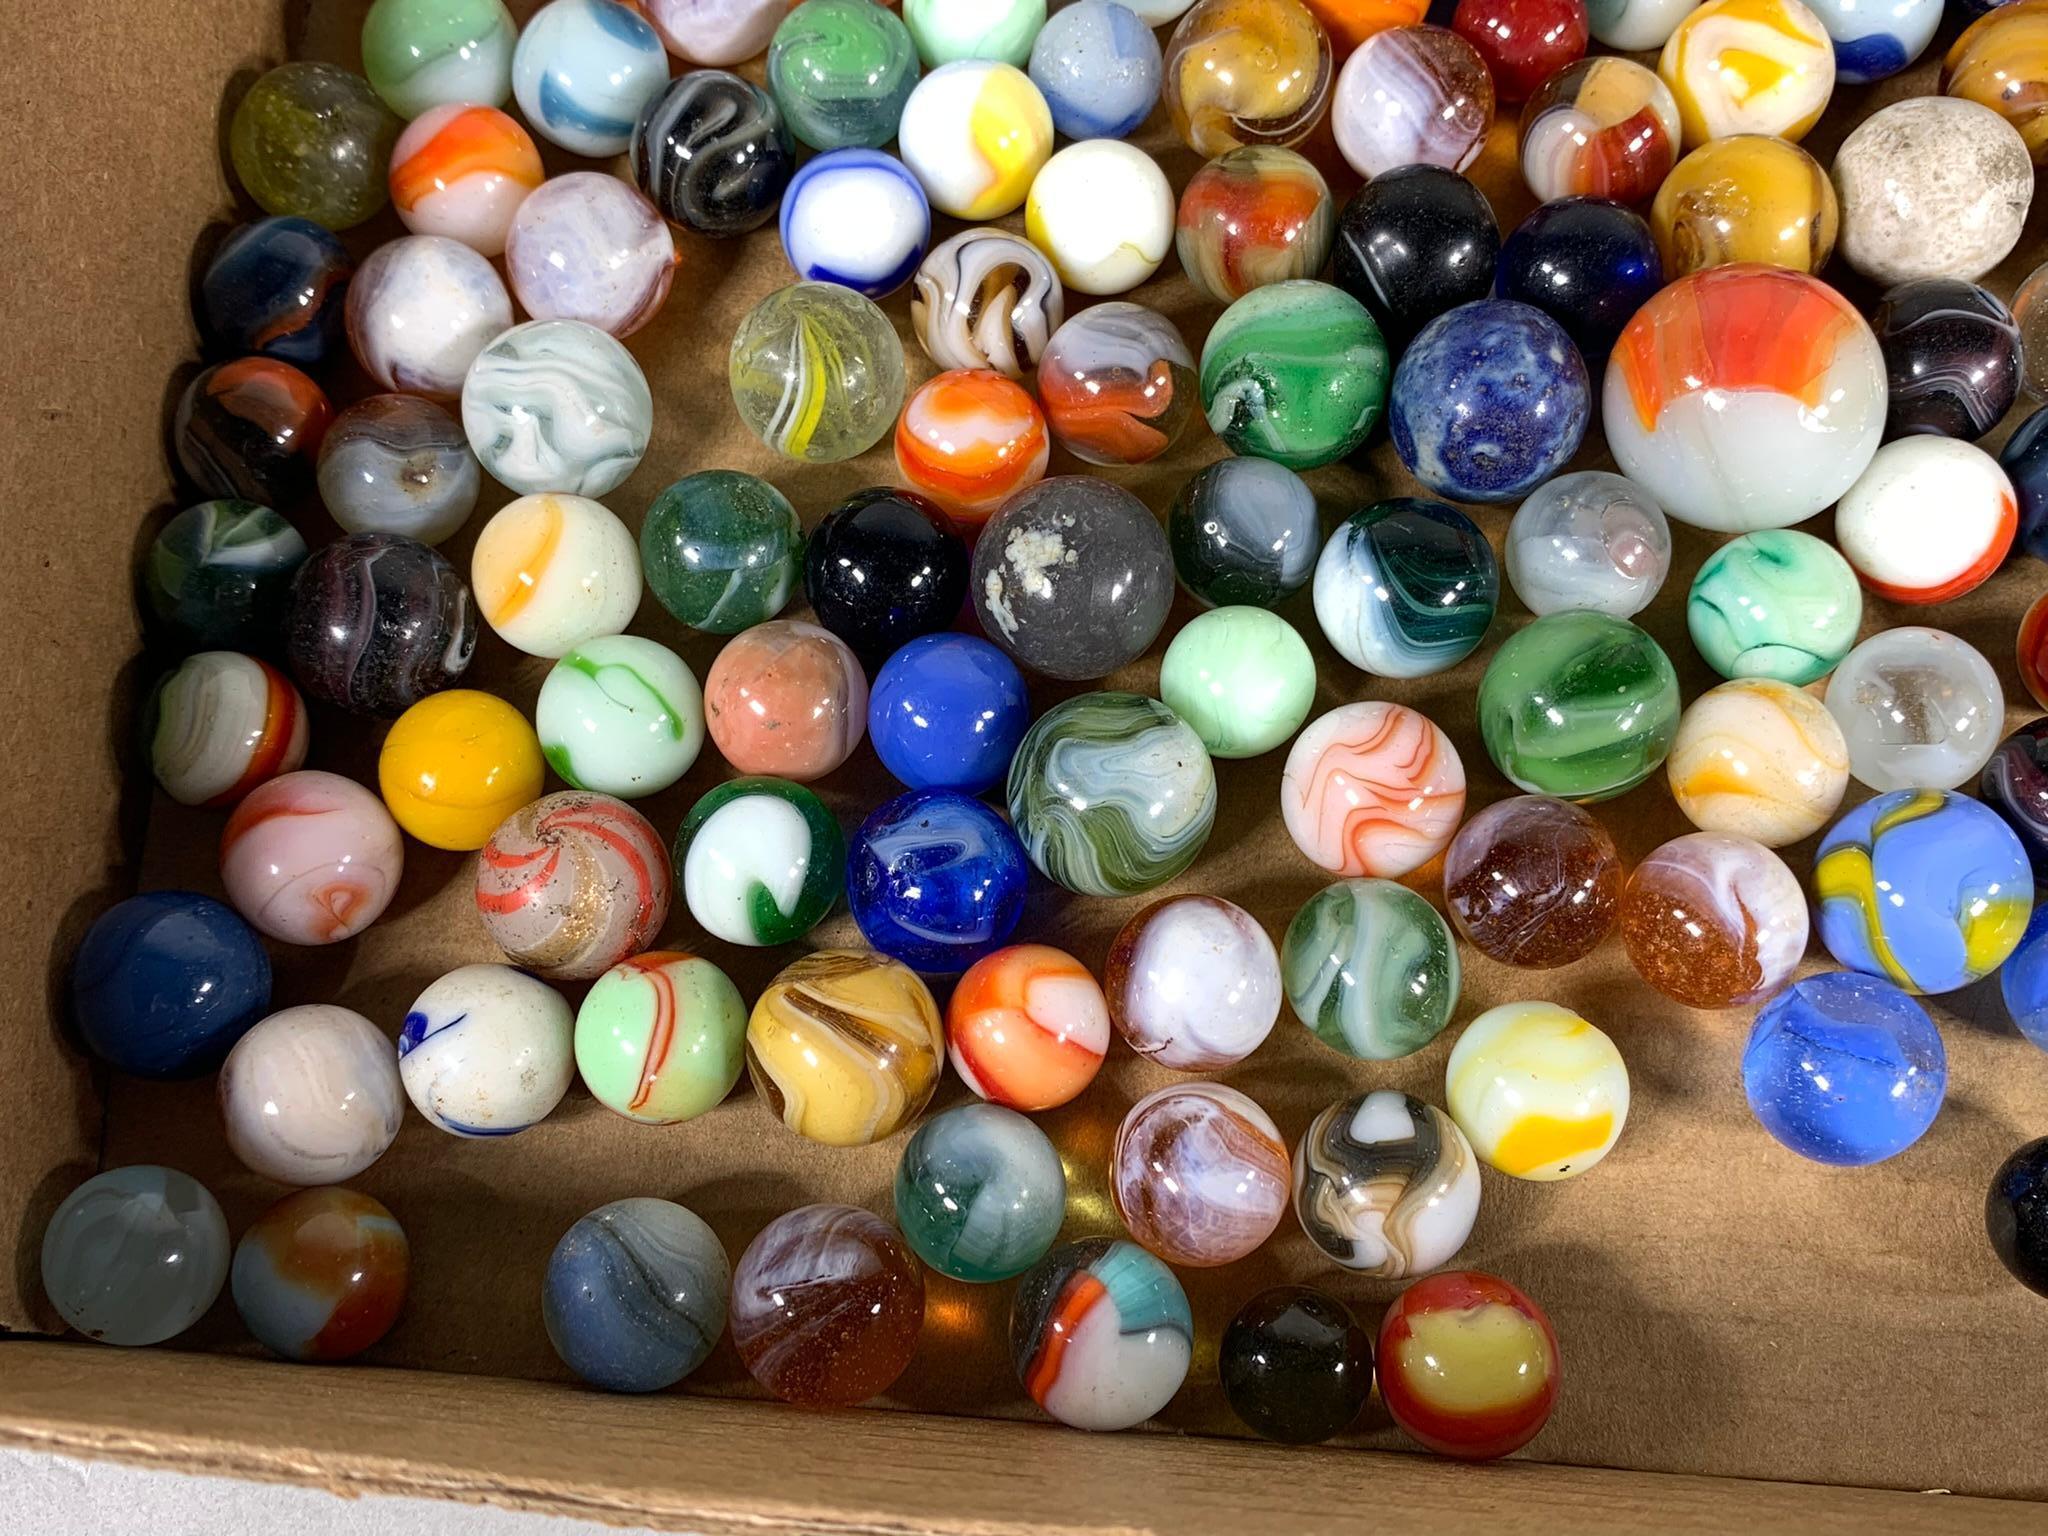 Great Group of Marbles